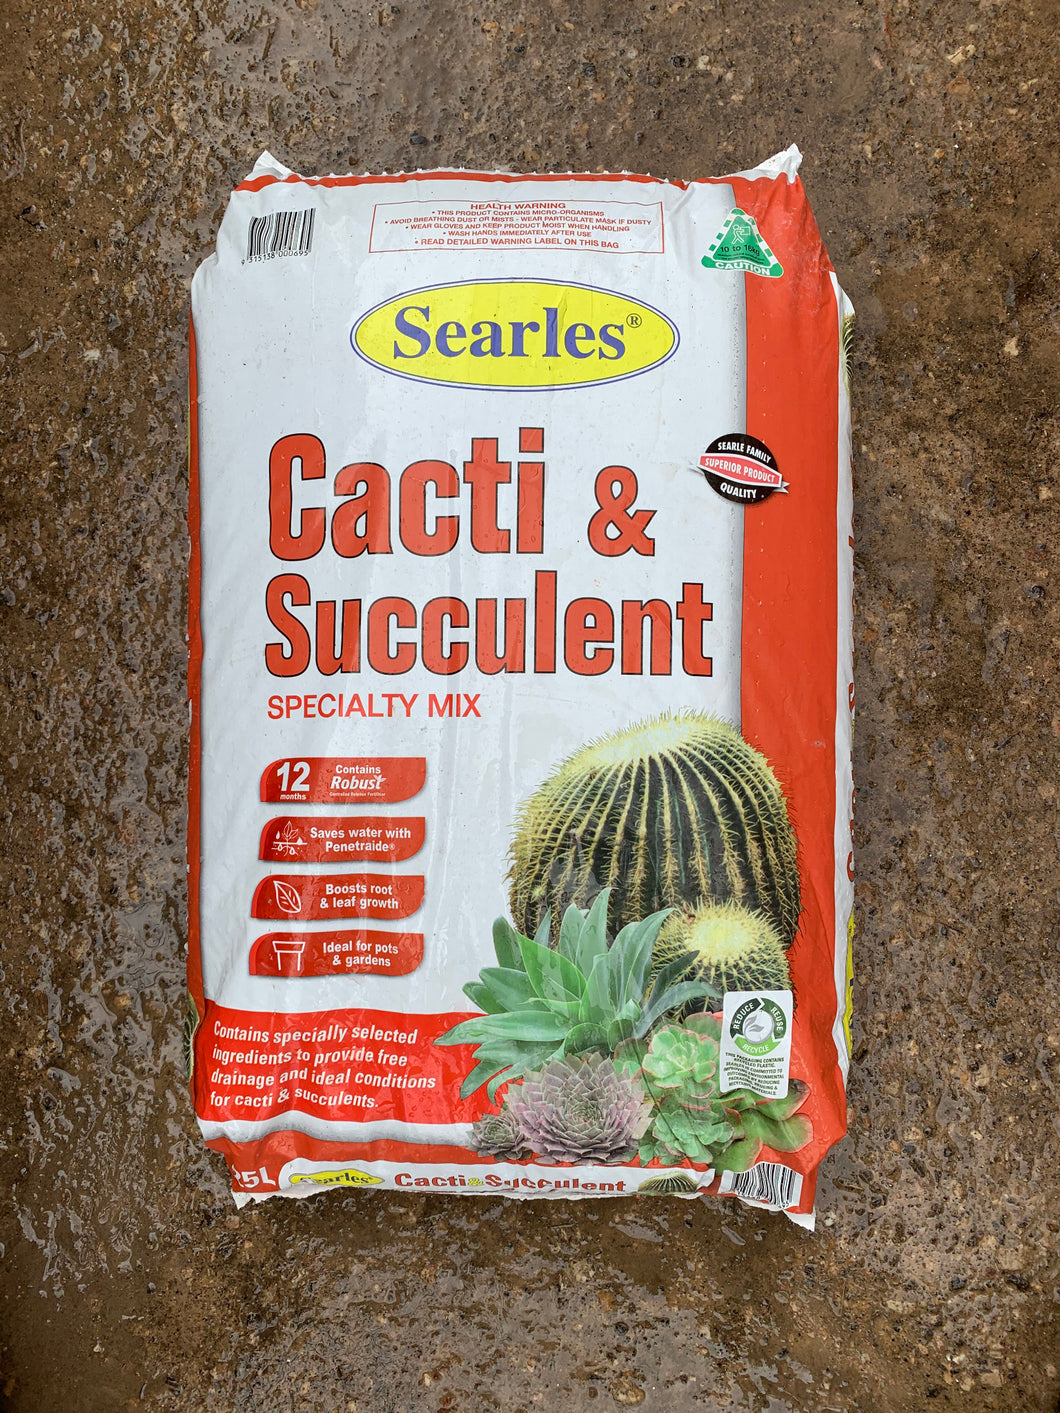 Cacti & Succulent Speciality Mix